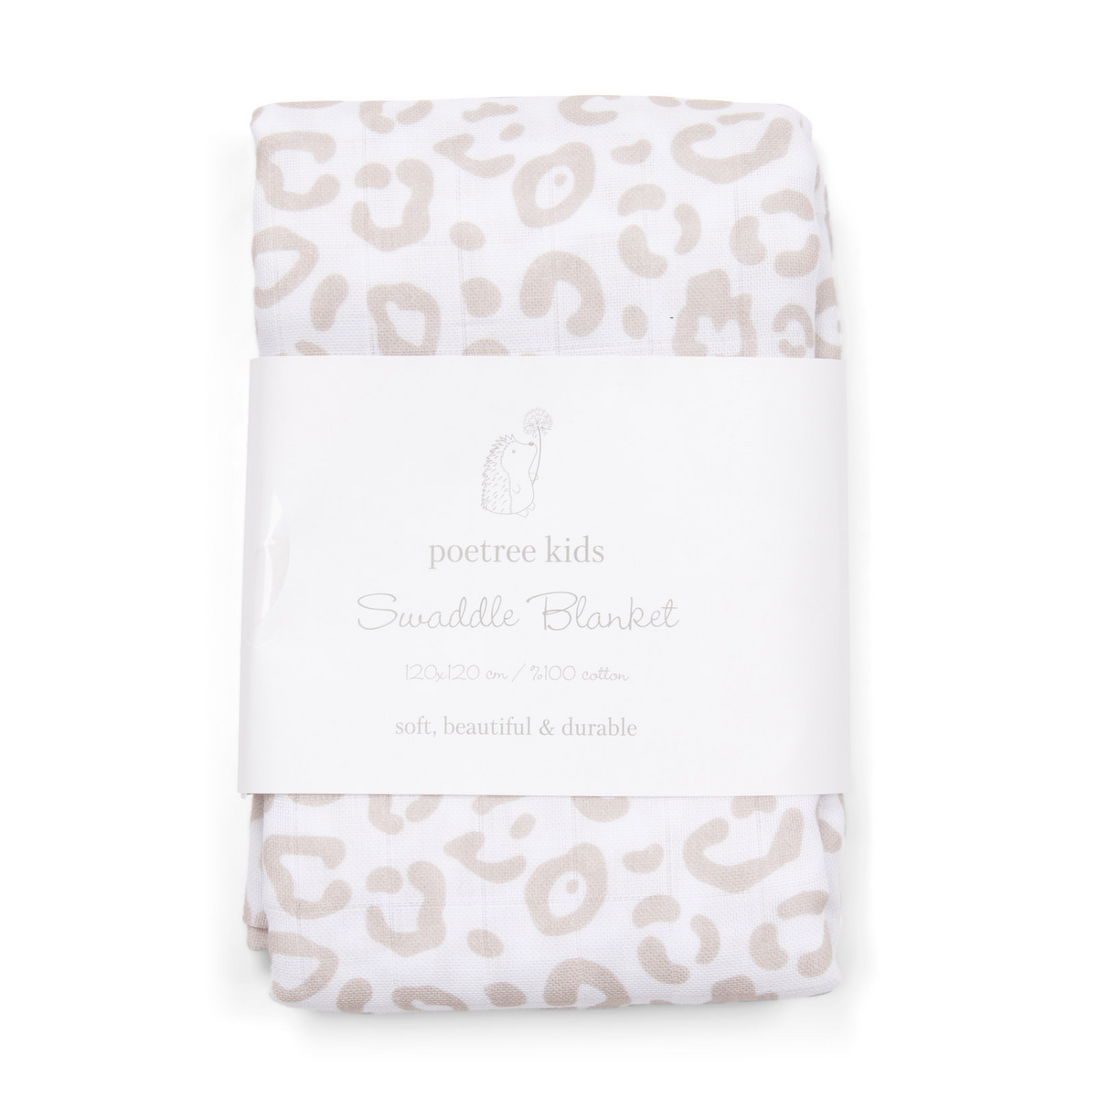 Pucktuch Swaddle 120x120 mit Leopard-Muster